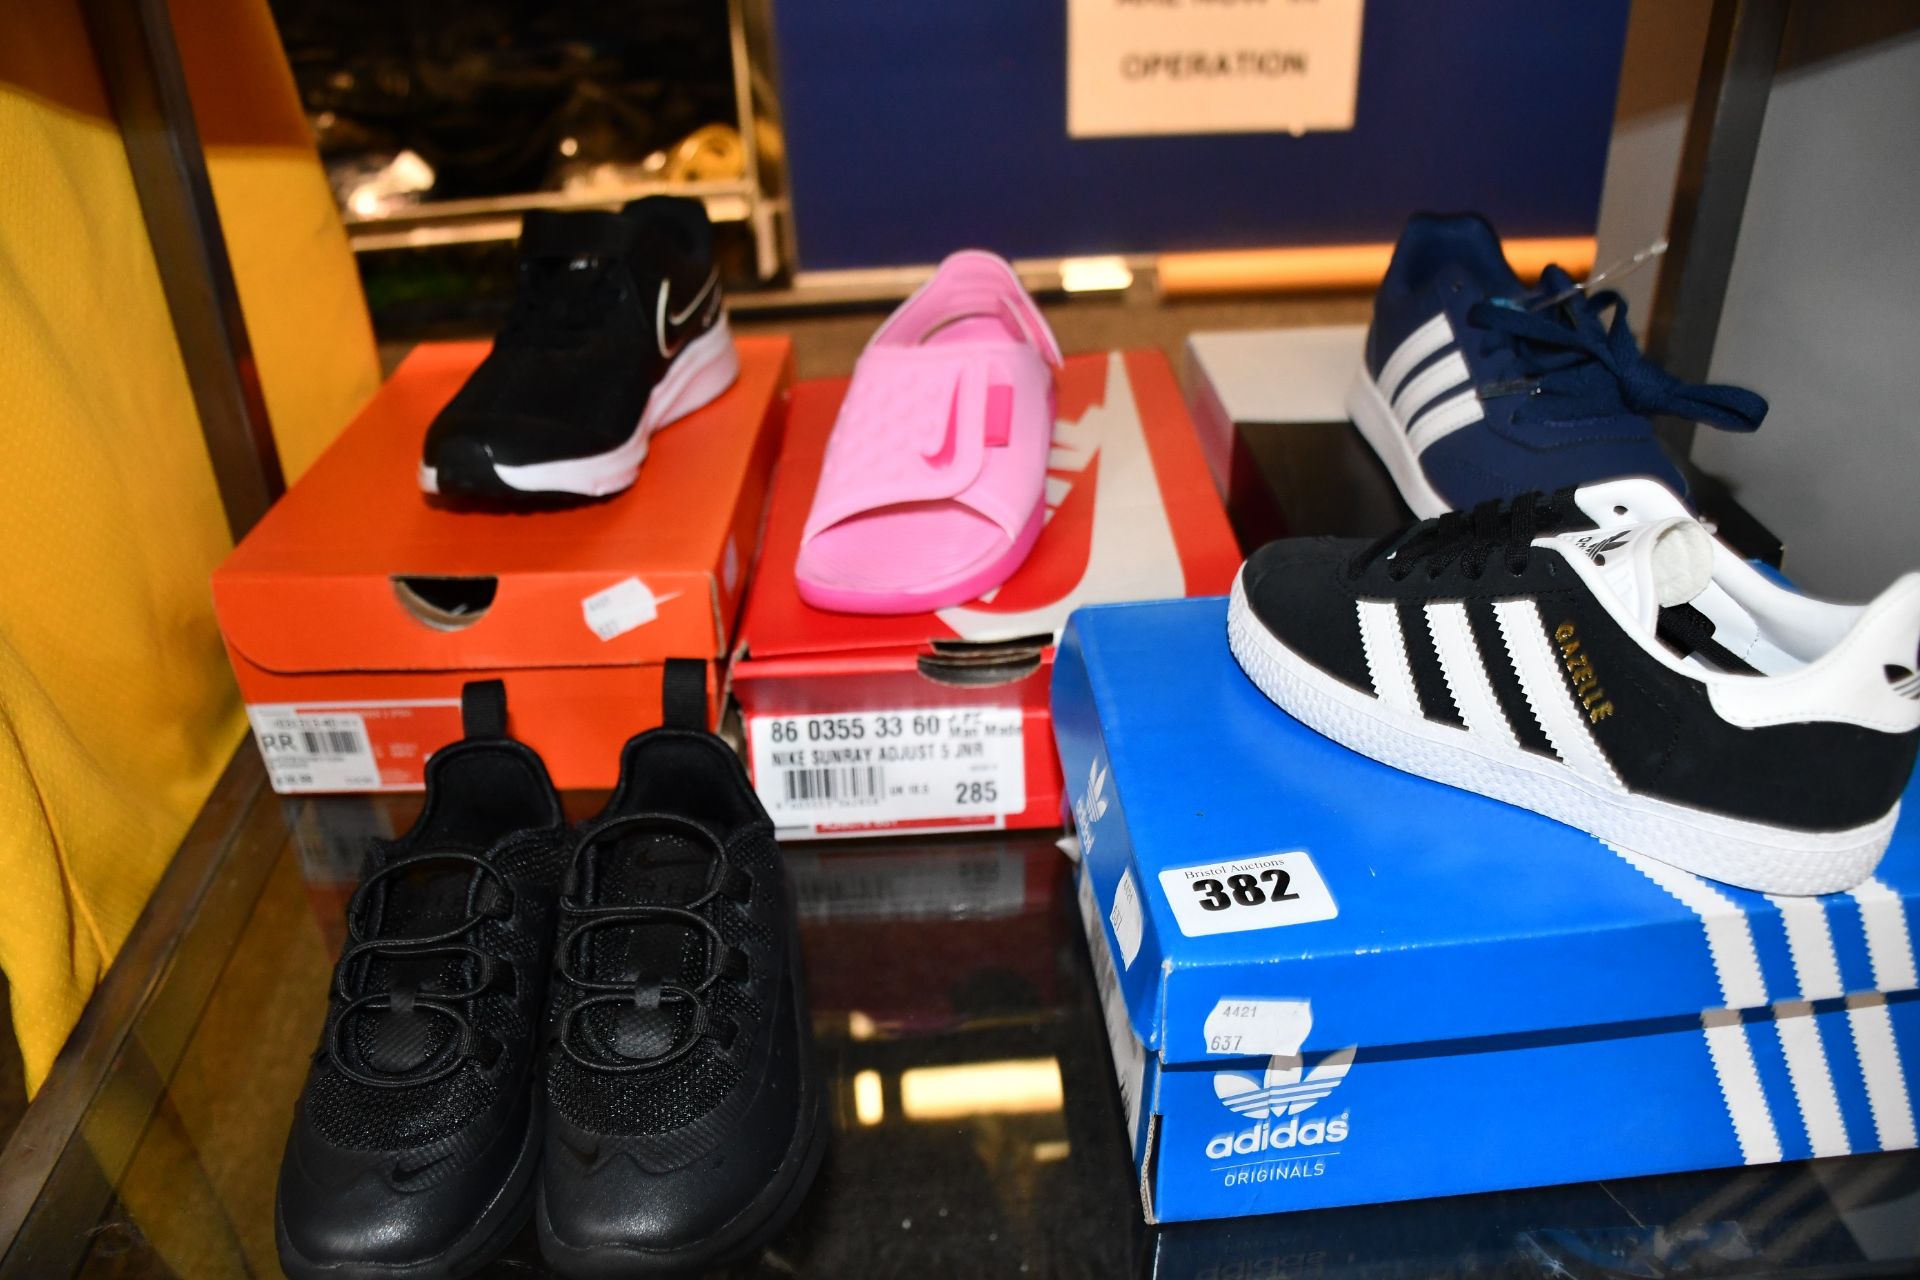 Five pairs of children's as new Adidas/Nike footwear to include Nike Sunray Adjust 5, Adidas VS